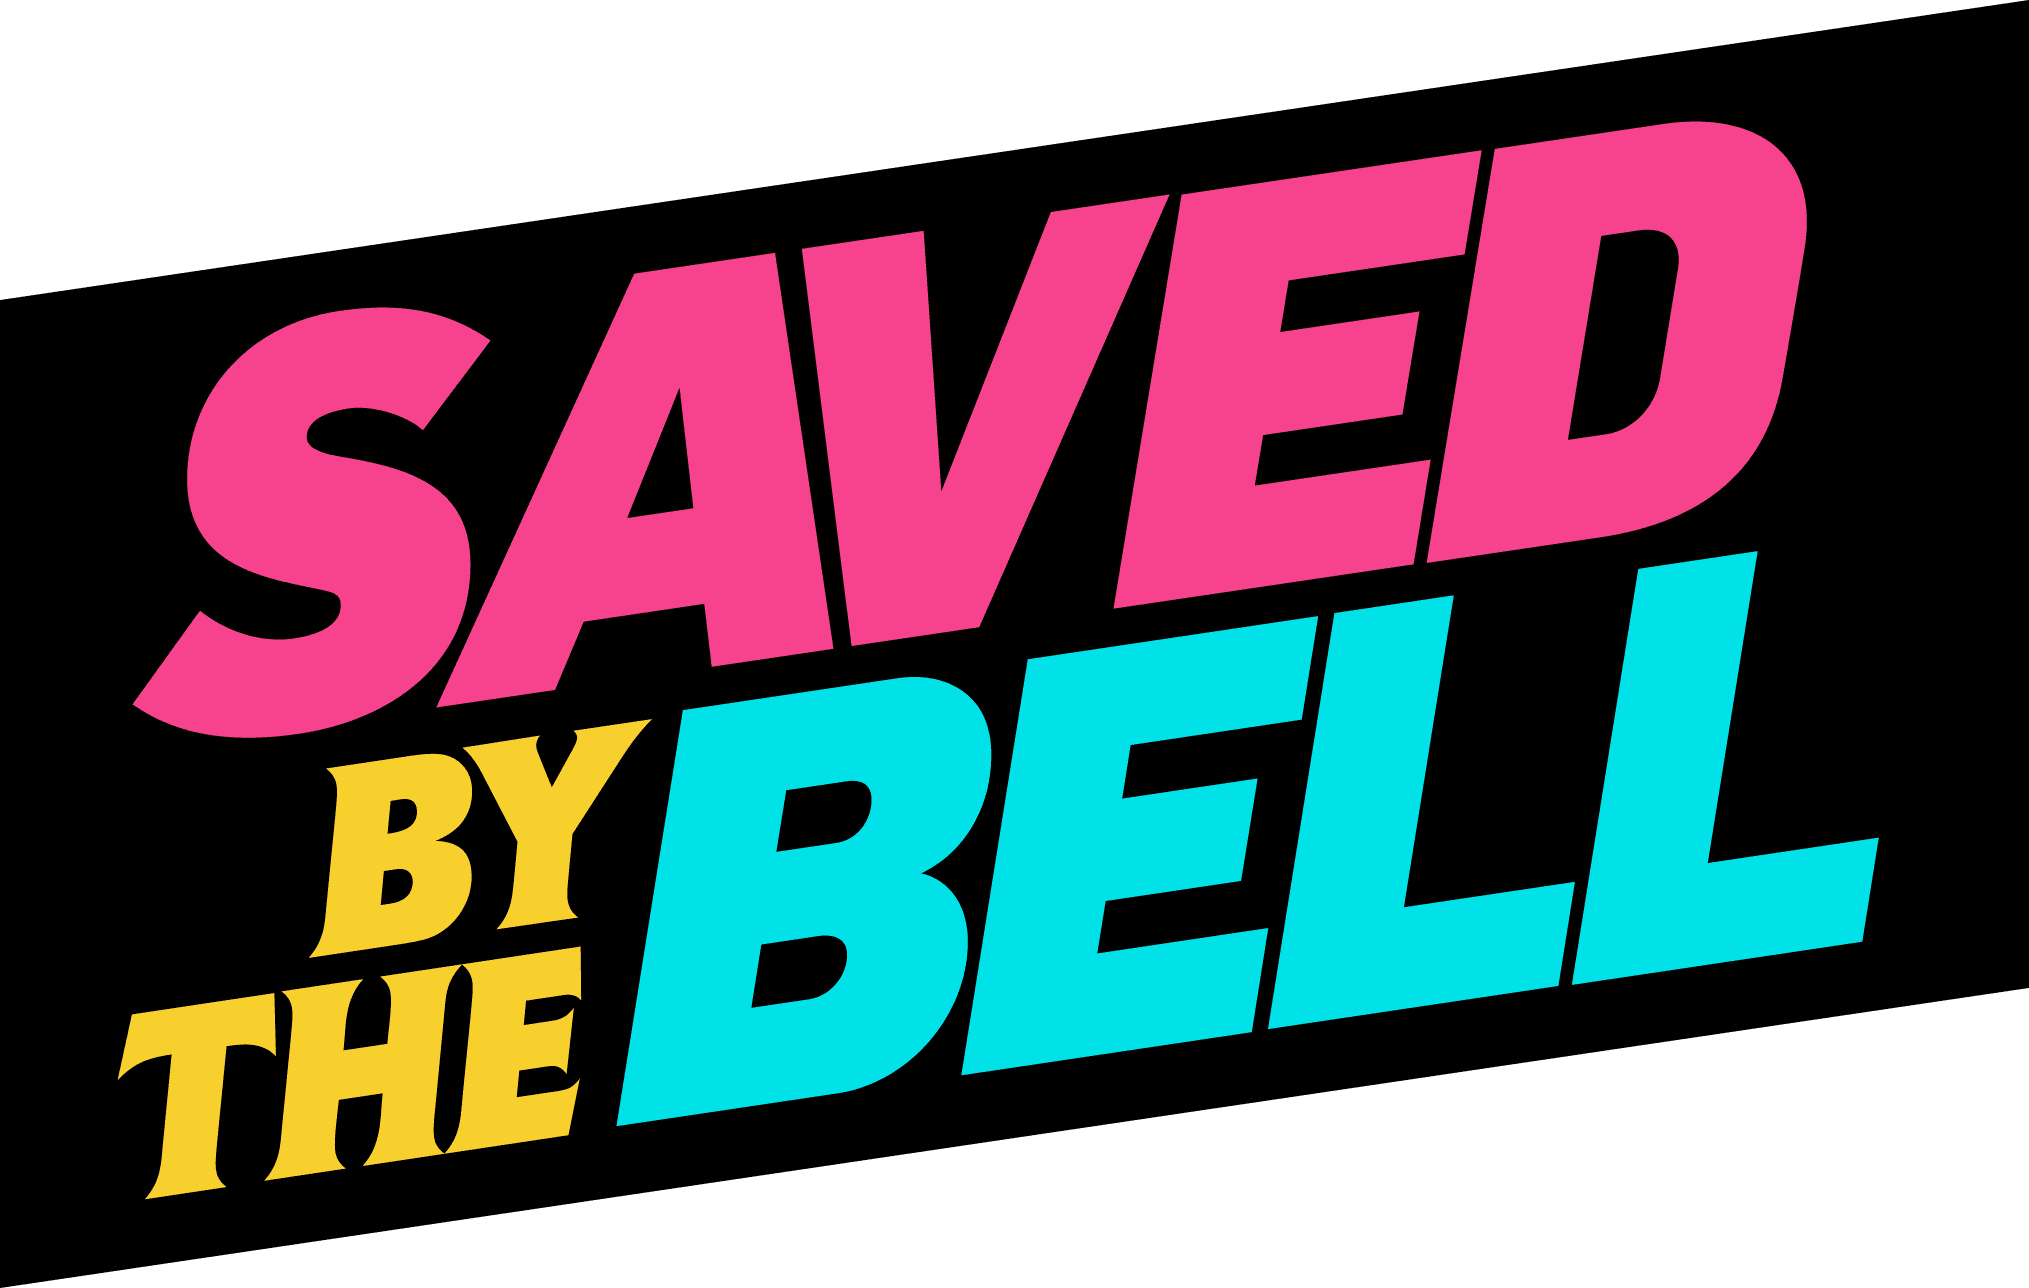 Saved by the Bell logo